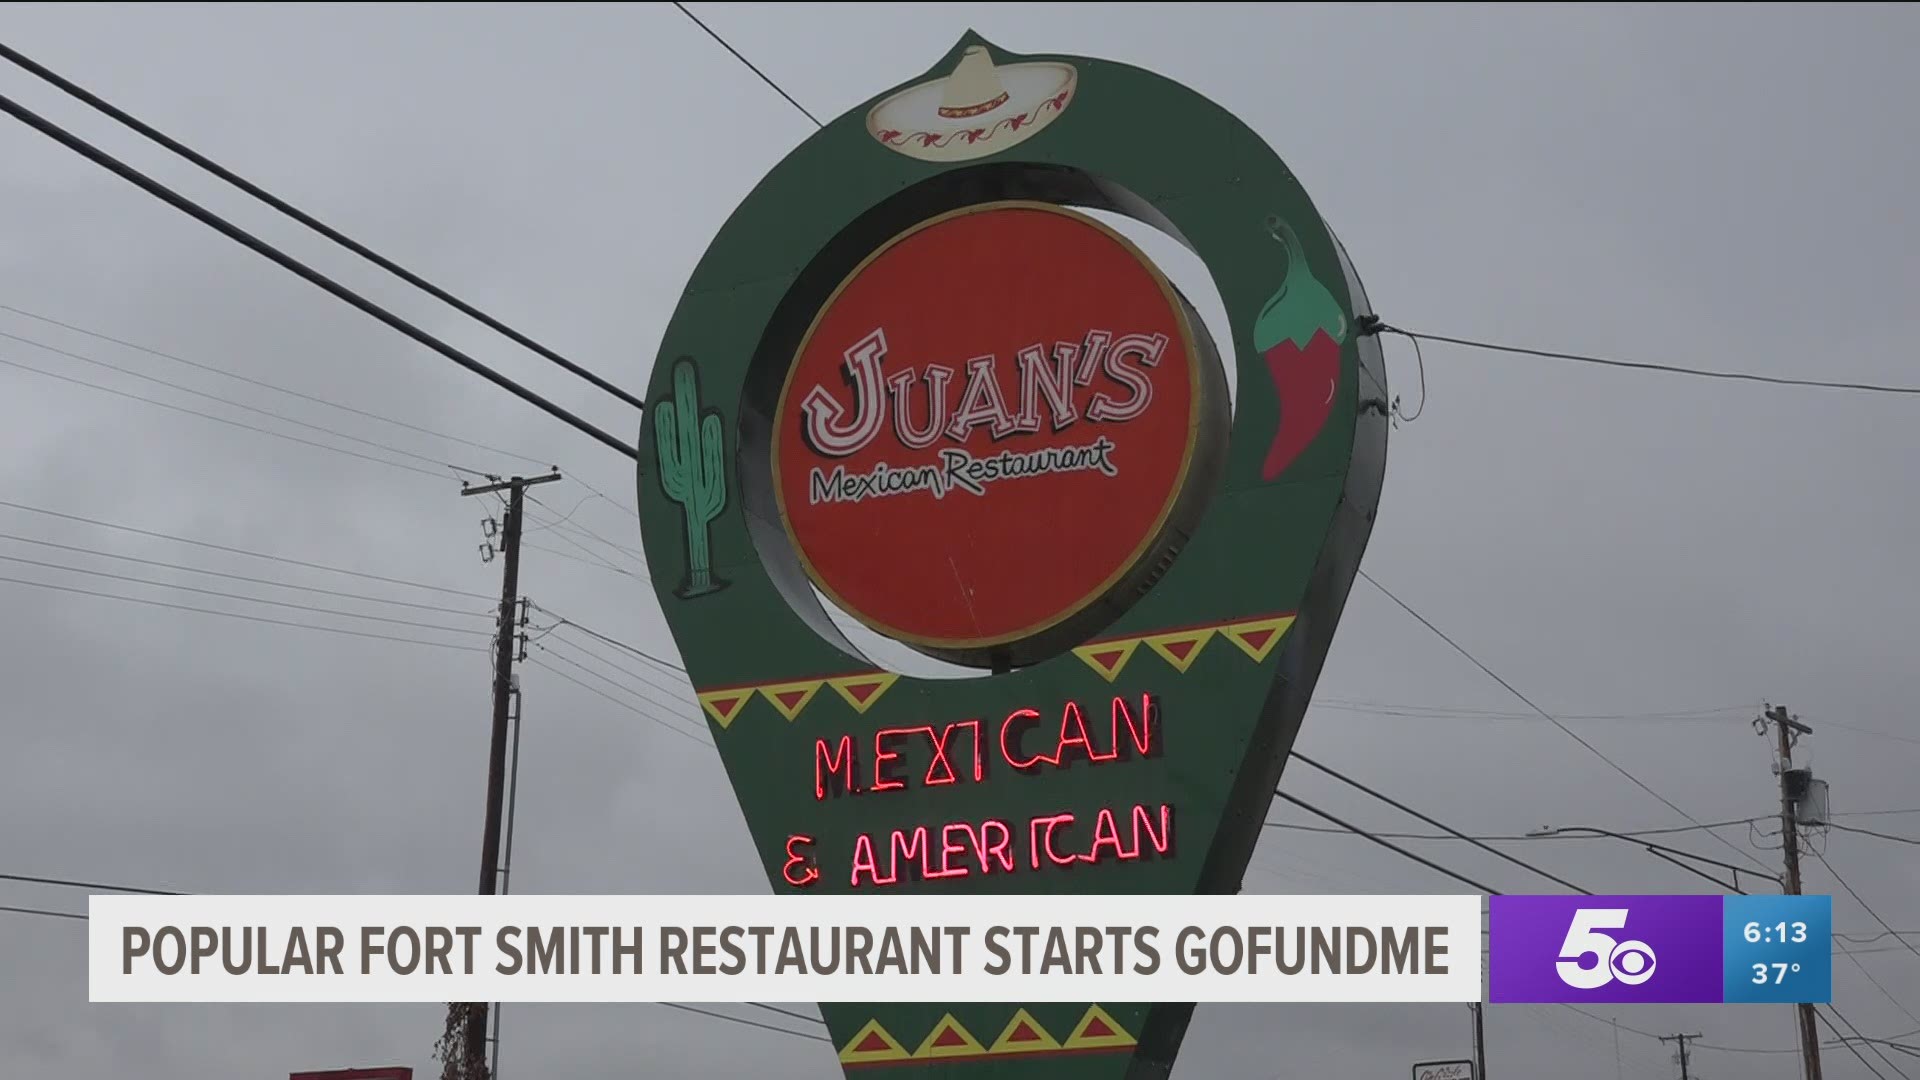 Juan's Mexican Restaurant is asking for $60,000 to pay its employees because right now it is only open for curbside and not making much profit.